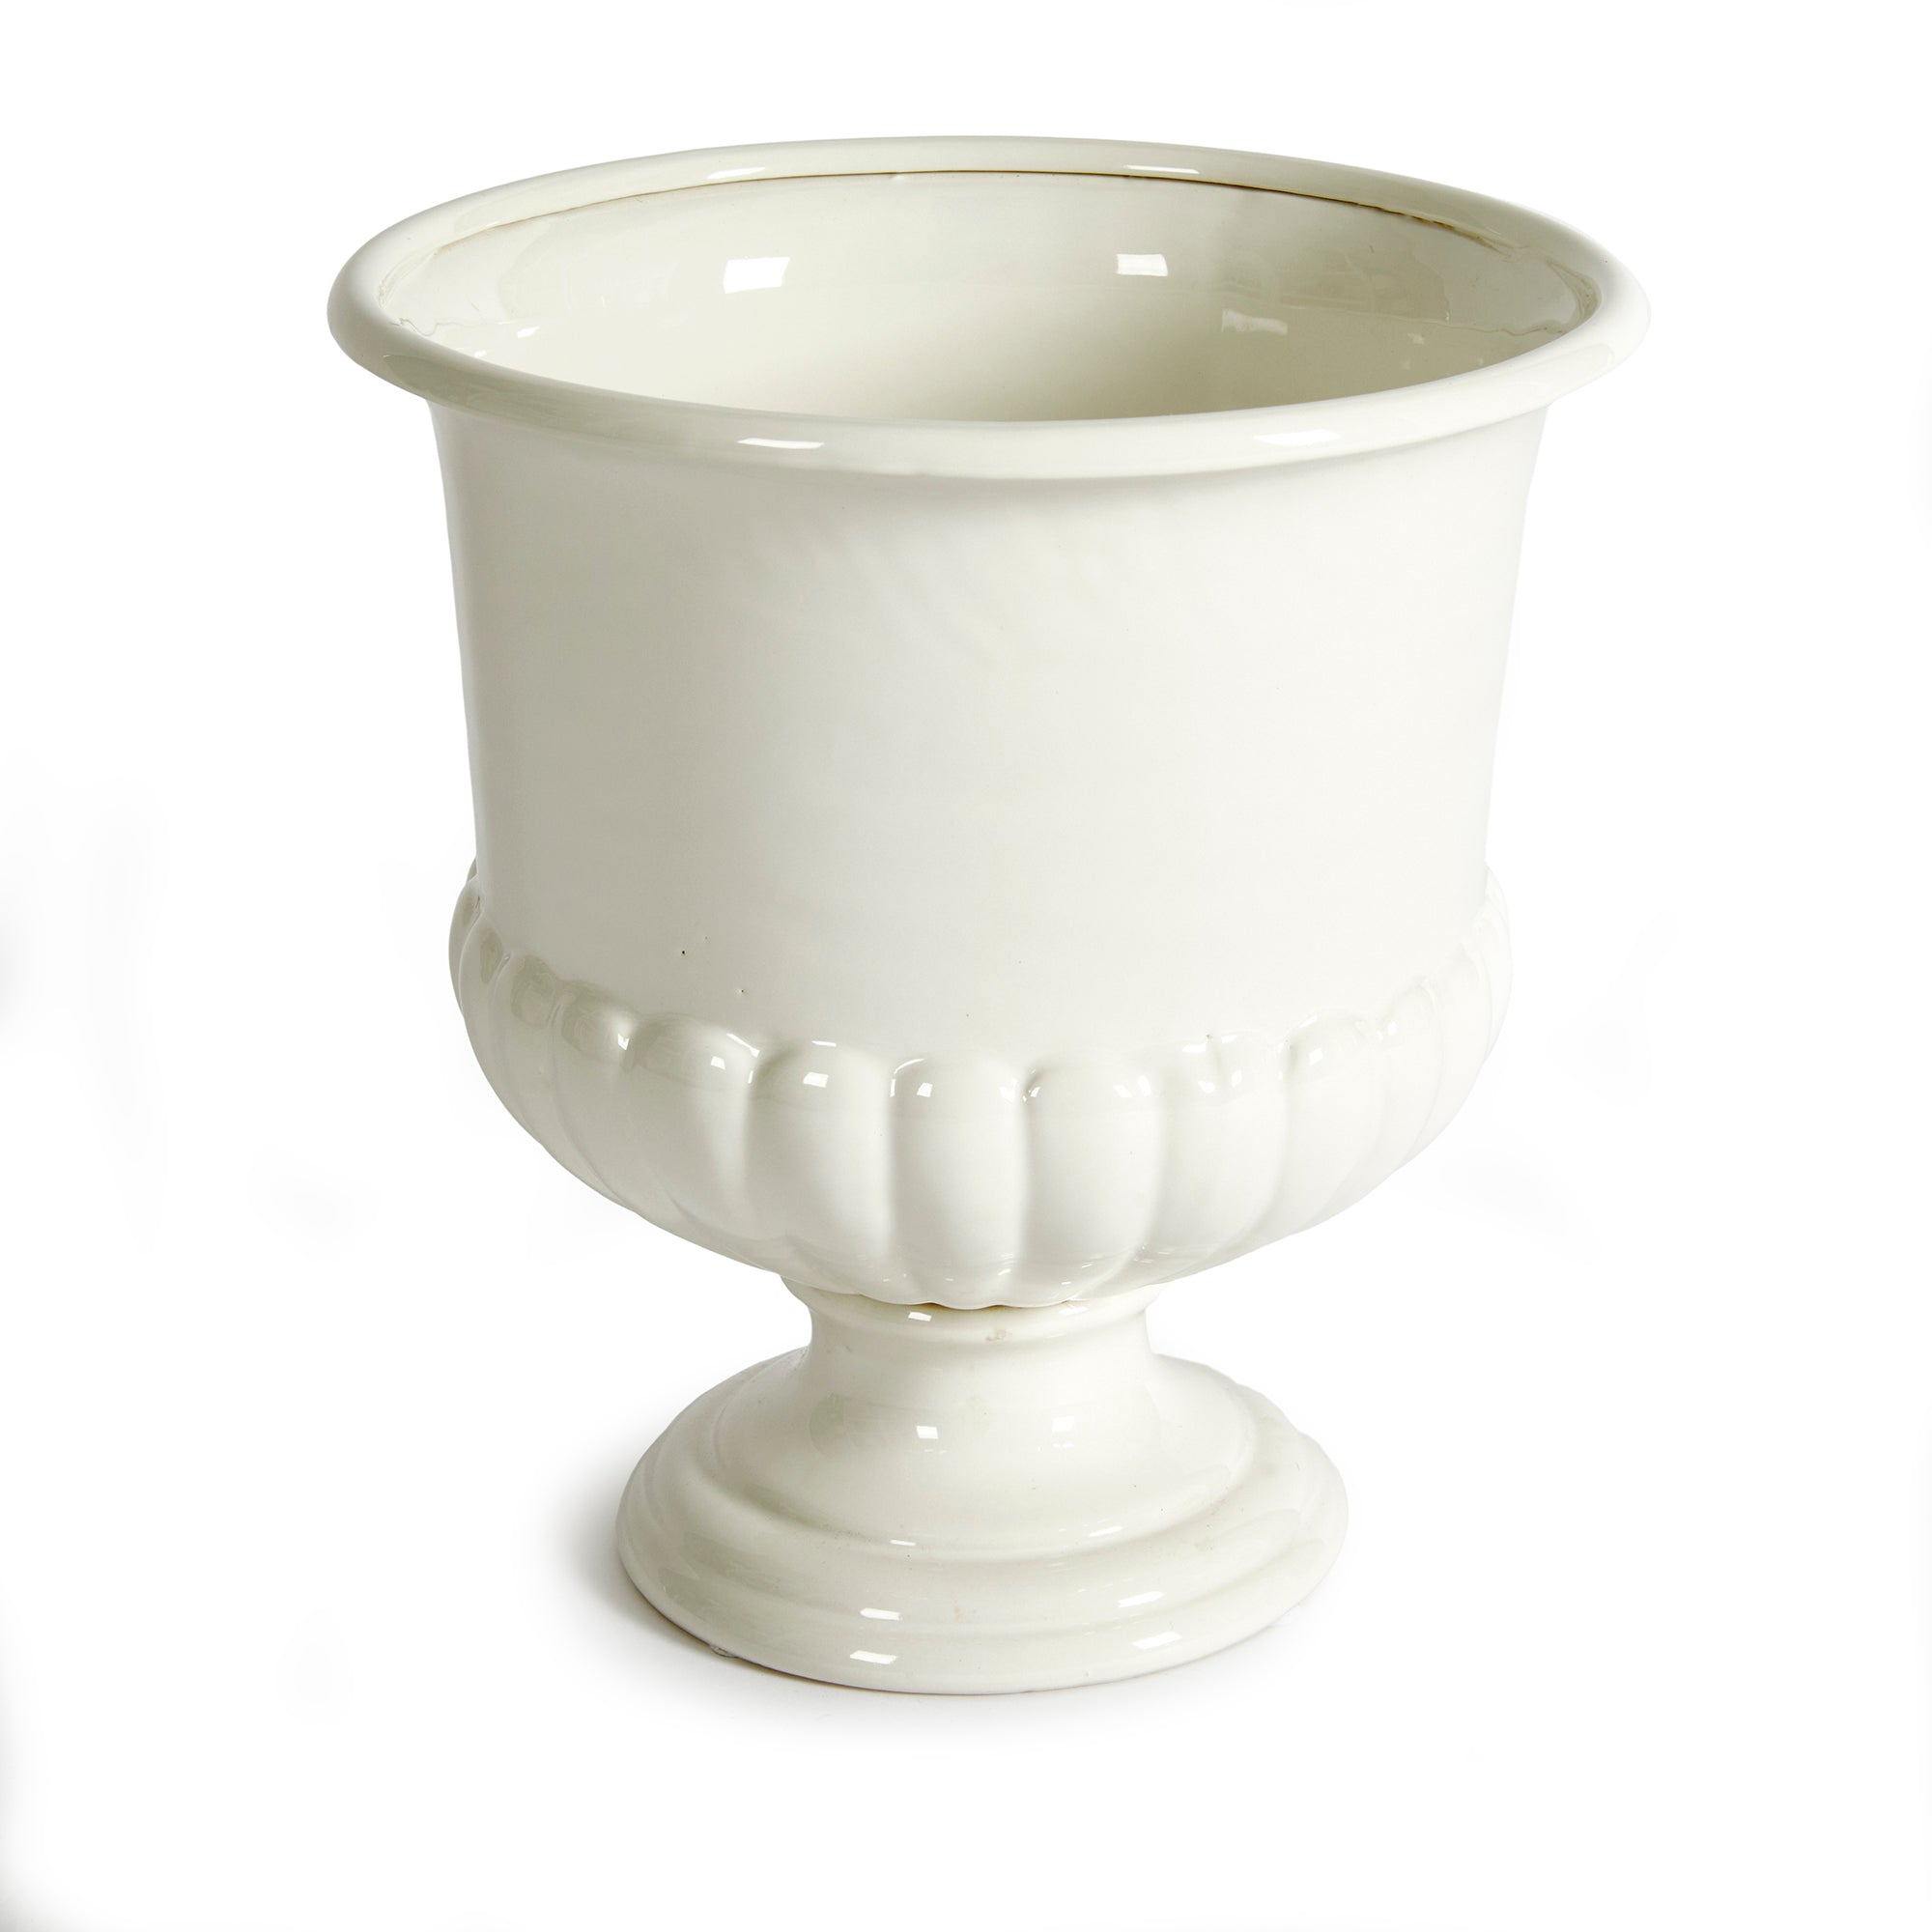 A real statement piece. The Mirabelle Pedestal Bowl is made in classic Italian style. A beautiful addition to any traditional to transitional space. Amethyst Home provides interior design, new construction, custom furniture, and area rugs in the Alpharetta metro area.